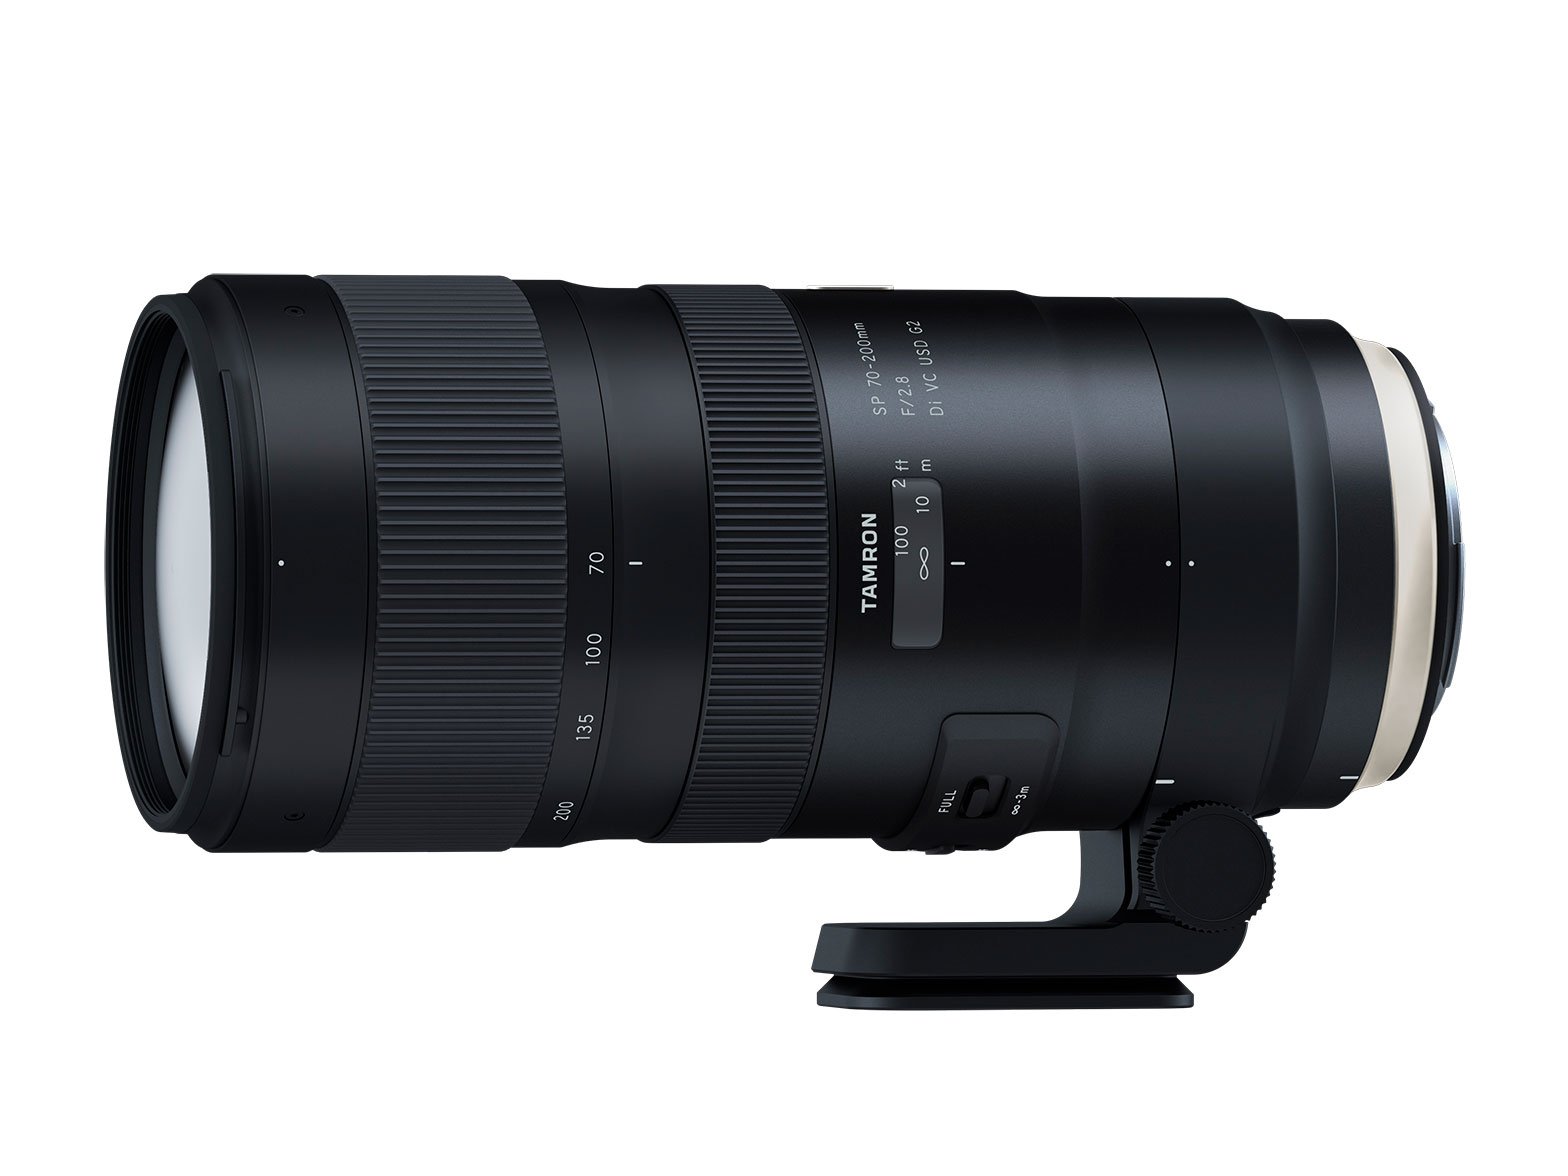 Tamron G2 70-200mm f/2.8 & 10-24mm f/3.5-4.5 Lenses now Available for Pre-order !